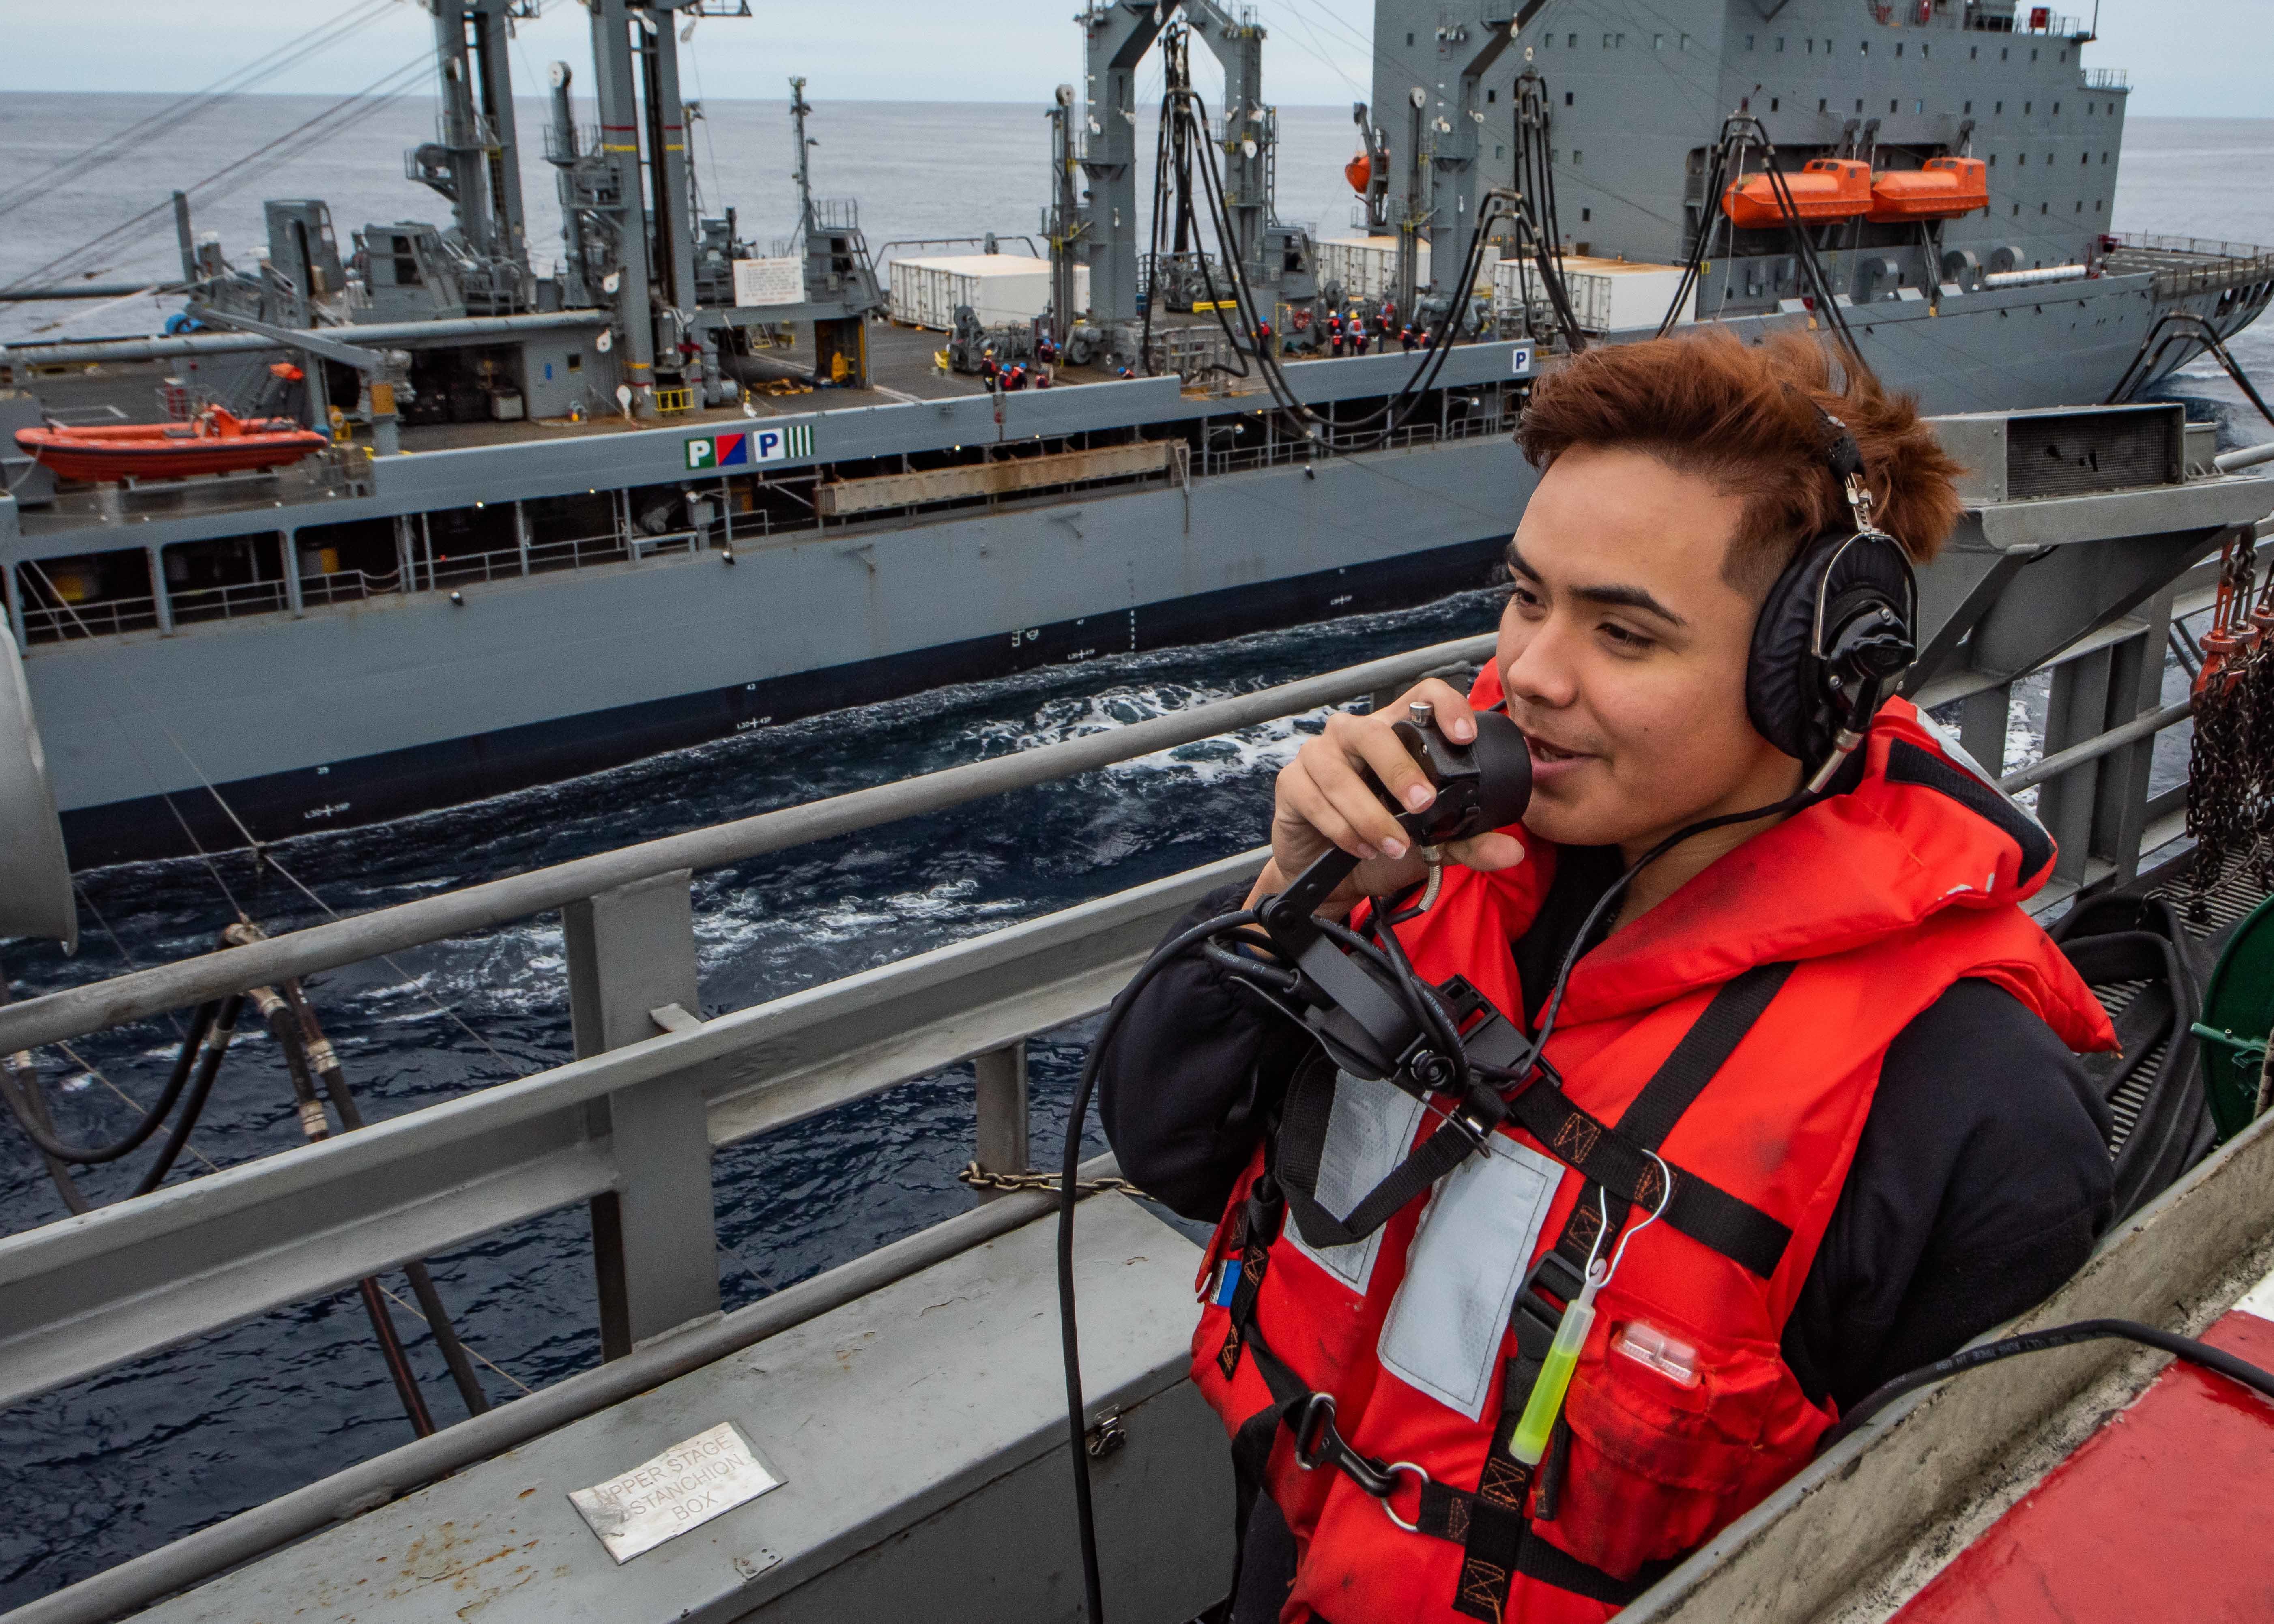 PACIFIC OCEAN --Seaman Shelbyan Diaz, from Harlingen, Texas, uses a sound-powered telephone to report the distance between the aircraft carrier USS Theodore Roosevelt and the Military Sealift Command fleet replenishment oiler USNS Yukon Dec. 3, 2019. Theodore Roosevelt is underway conducting routine training in the eastern Pacific Ocean. (U.S. Navy photo by Airman D.J. Schwartz)